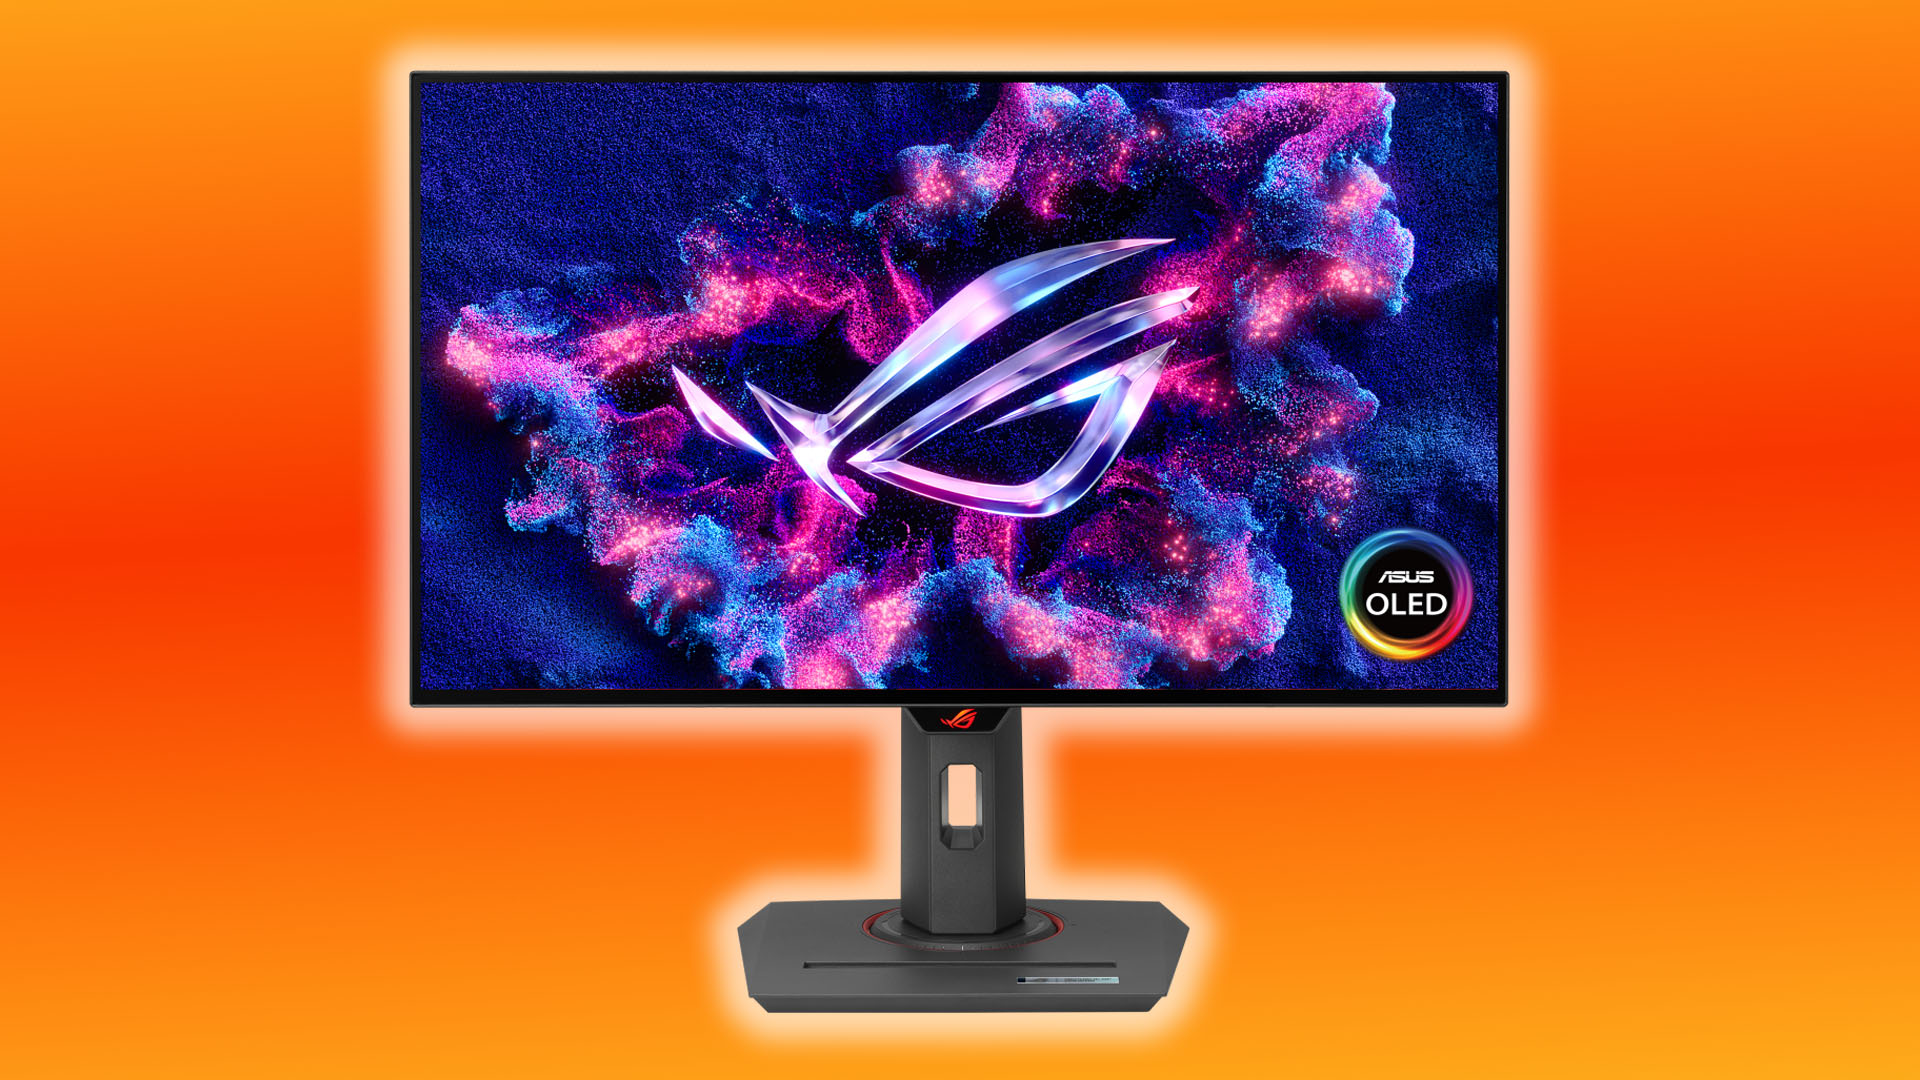 Asus introduces the world’s first OLED gaming monitor with innovative technology.